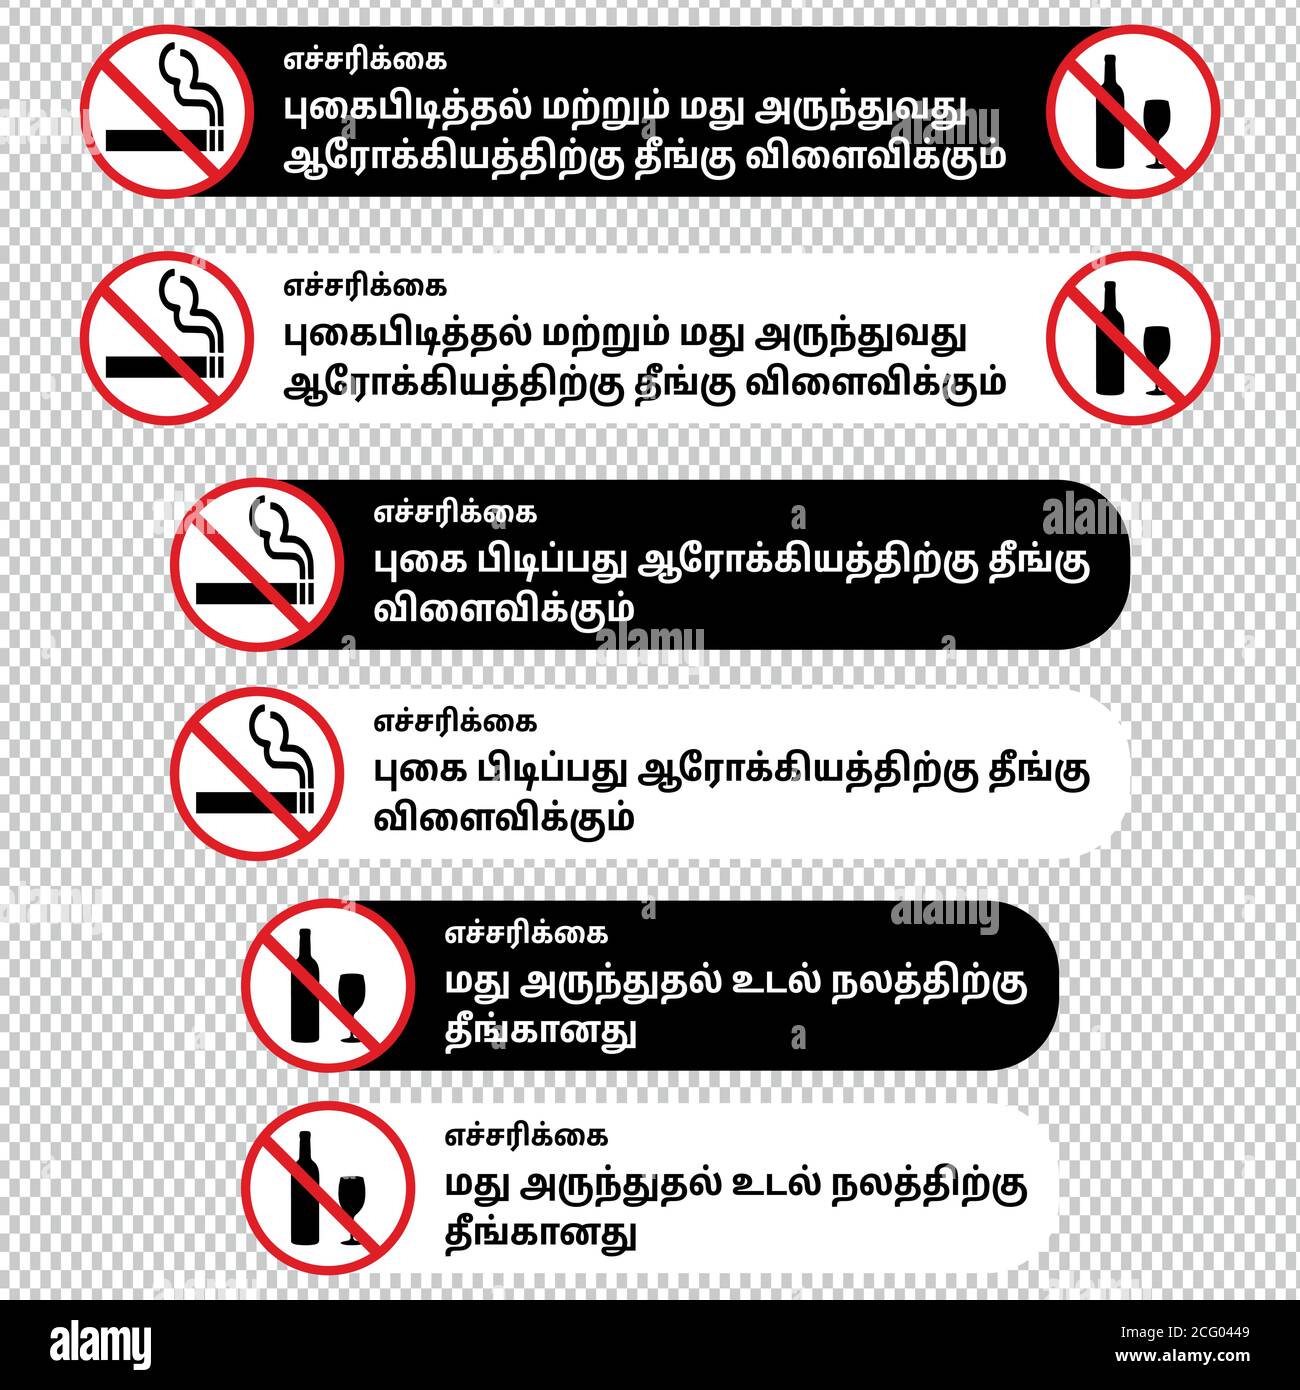 Statutory warnings in Tamil language. Translation: 'Smoking and alcohol consumption is injurious to health'. Black and white versions. Stock Vector